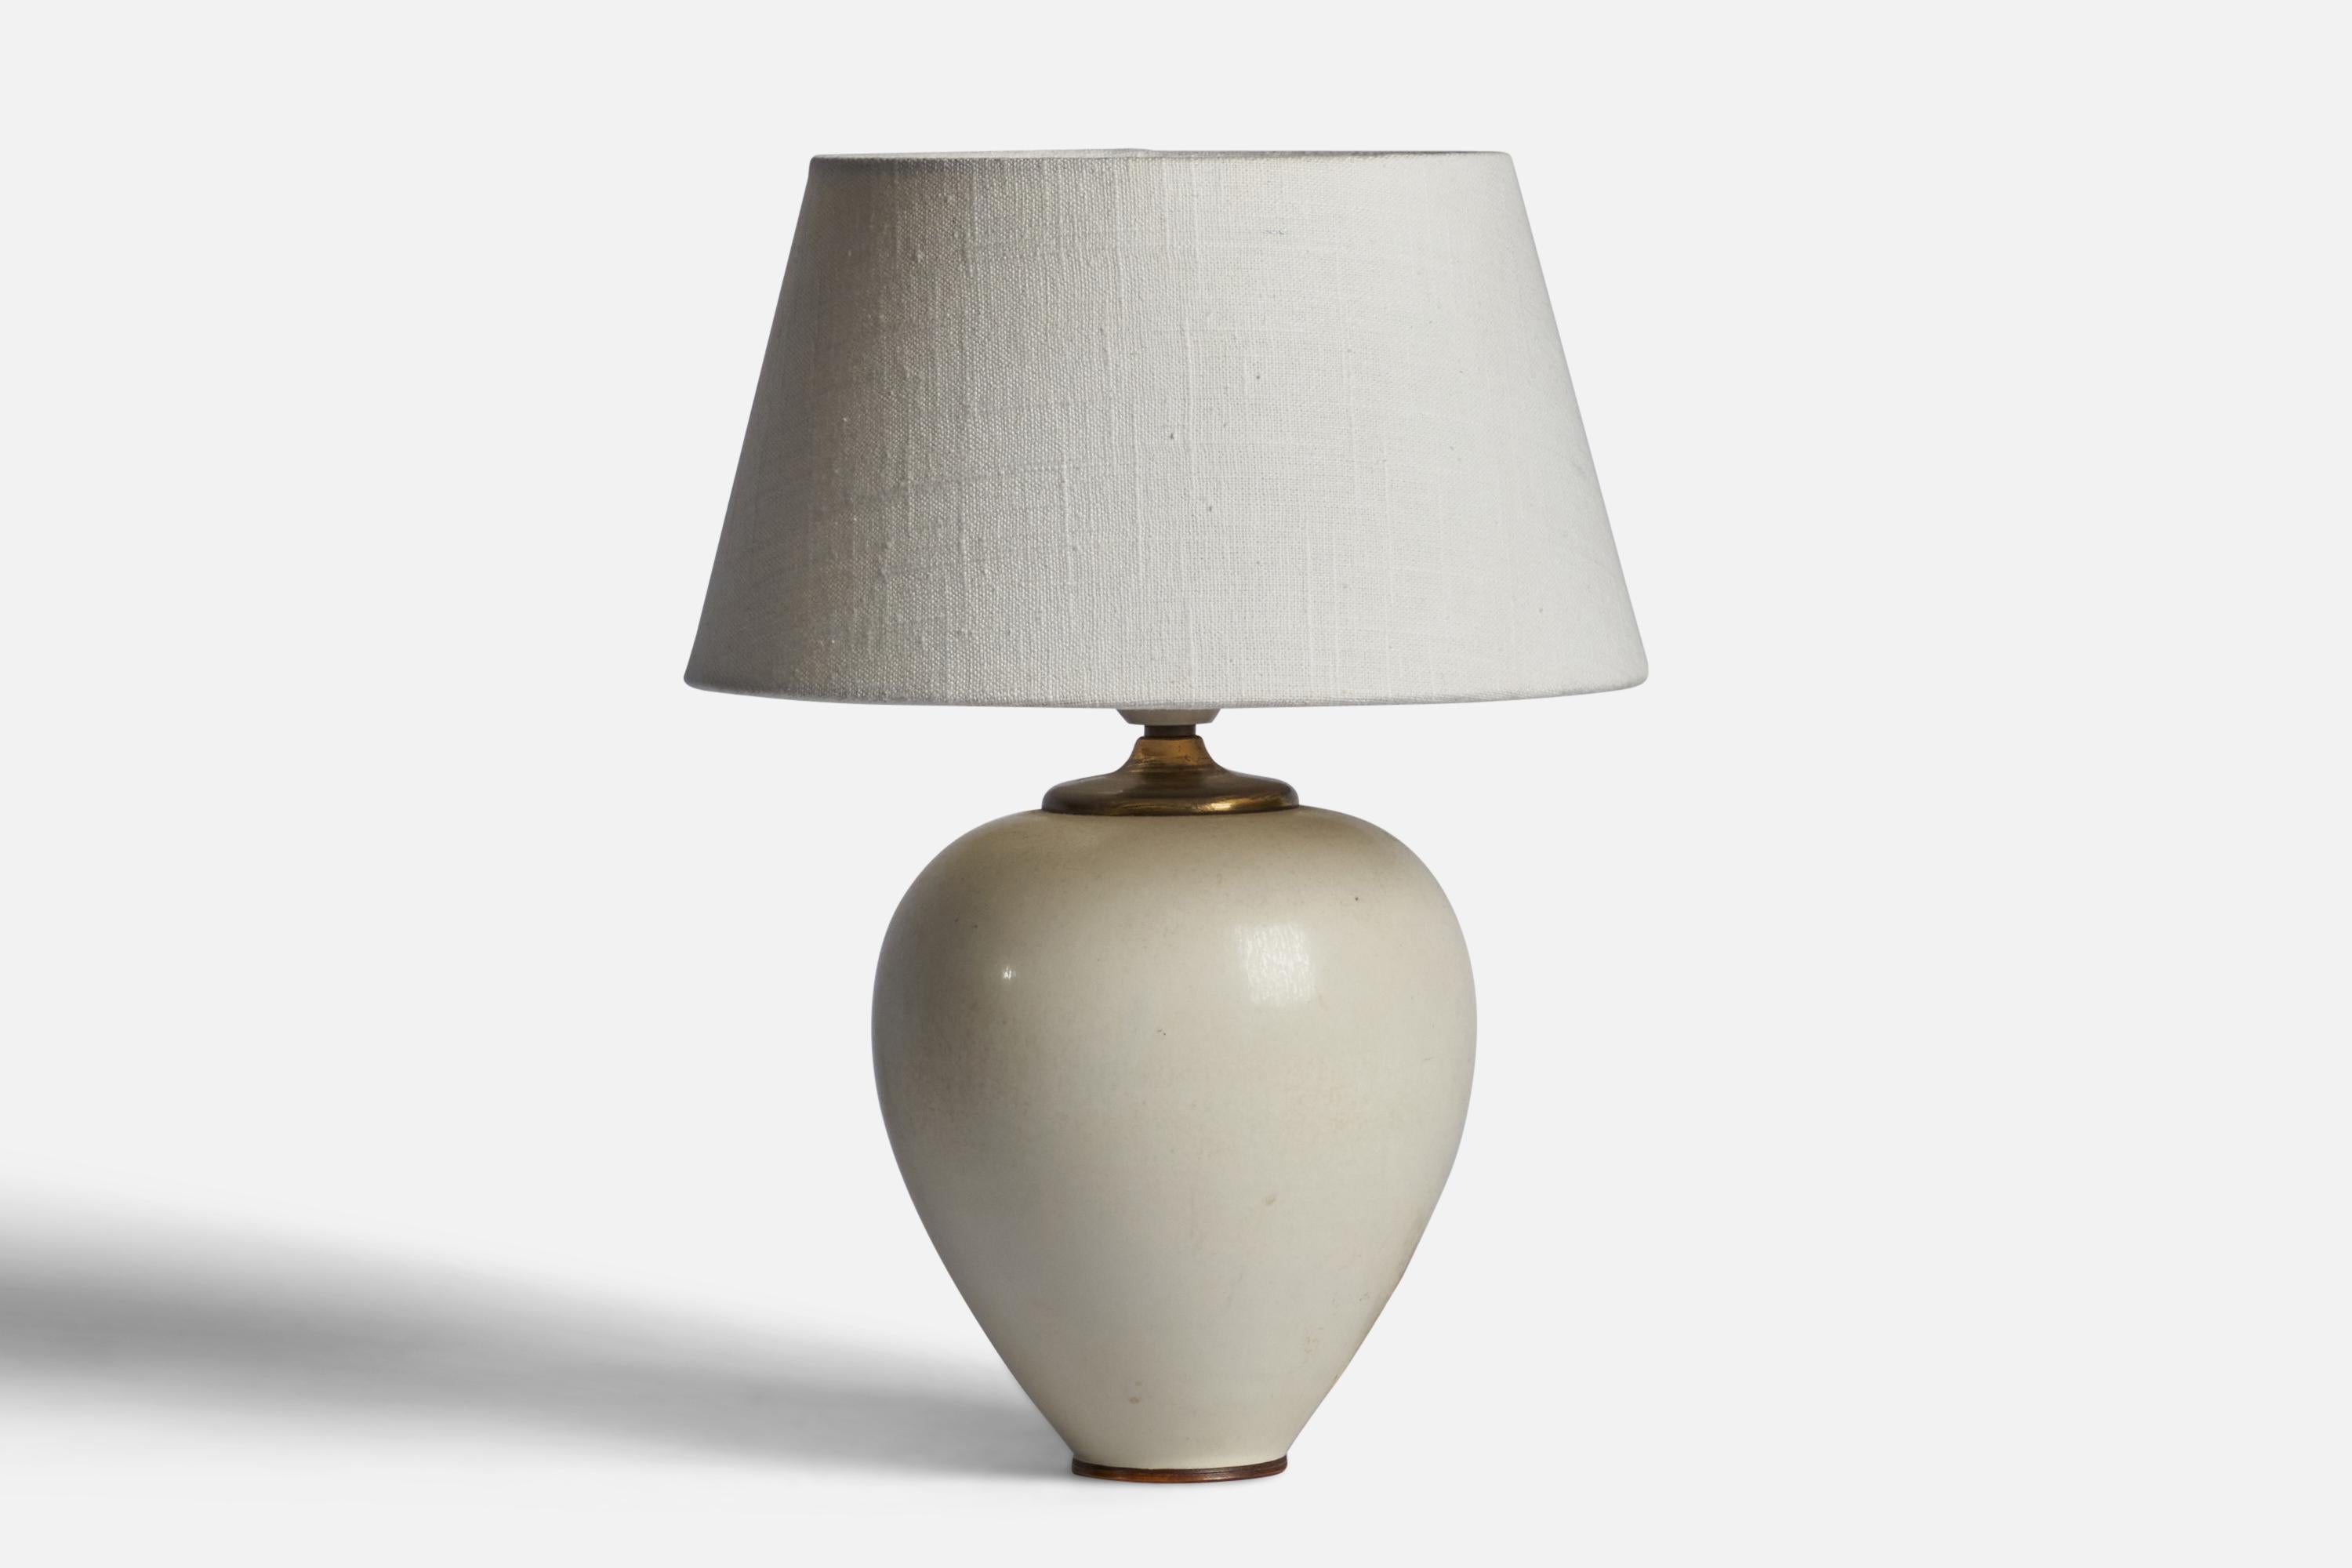 An off-white glazed stoneware and brass table lamp designed by Berndt Friberg and produced by Gustavsberg, Sweden, 1950s.

Dimensions of Lamp (inches): 10.5” H x 6.25” Diameter
Dimensions of Shade (inches): 7” Top Diameter x 10” Bottom Diameter x